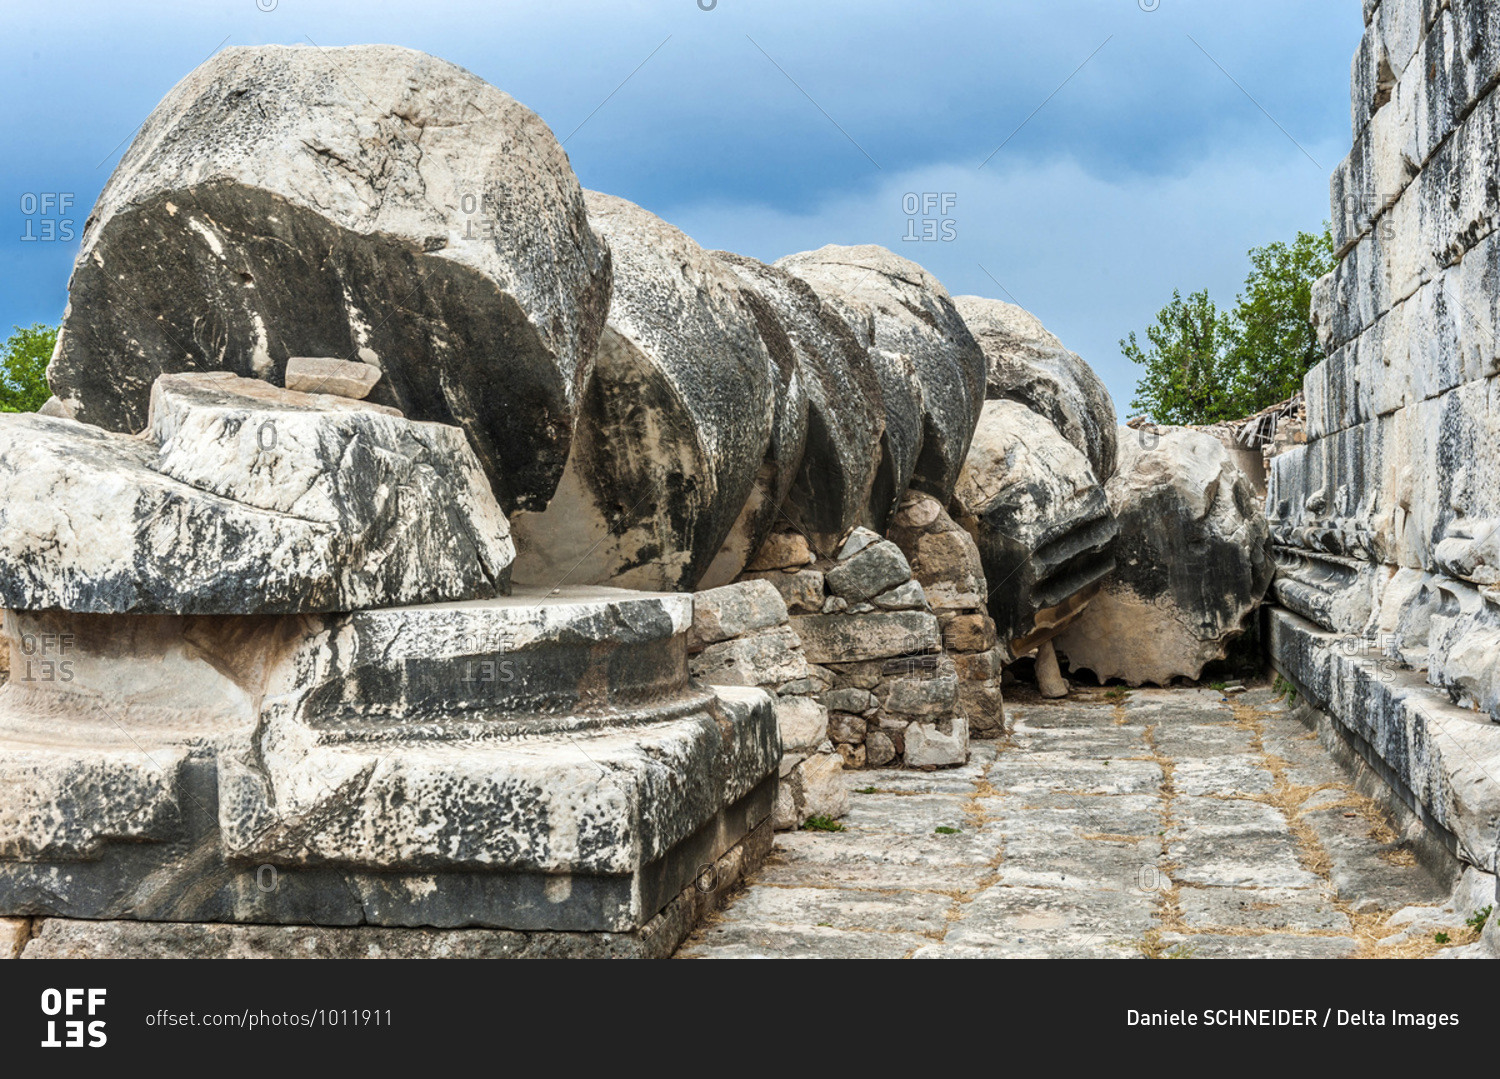 Turkey, archeological Dydimes archeological site, ruins of an unfinished Greek temple dedicated to Apollo (7th century, BC, by Paeanius and Delphinus of Miletus), pieces of unfinished columns crumbled by the earthquake of 1943